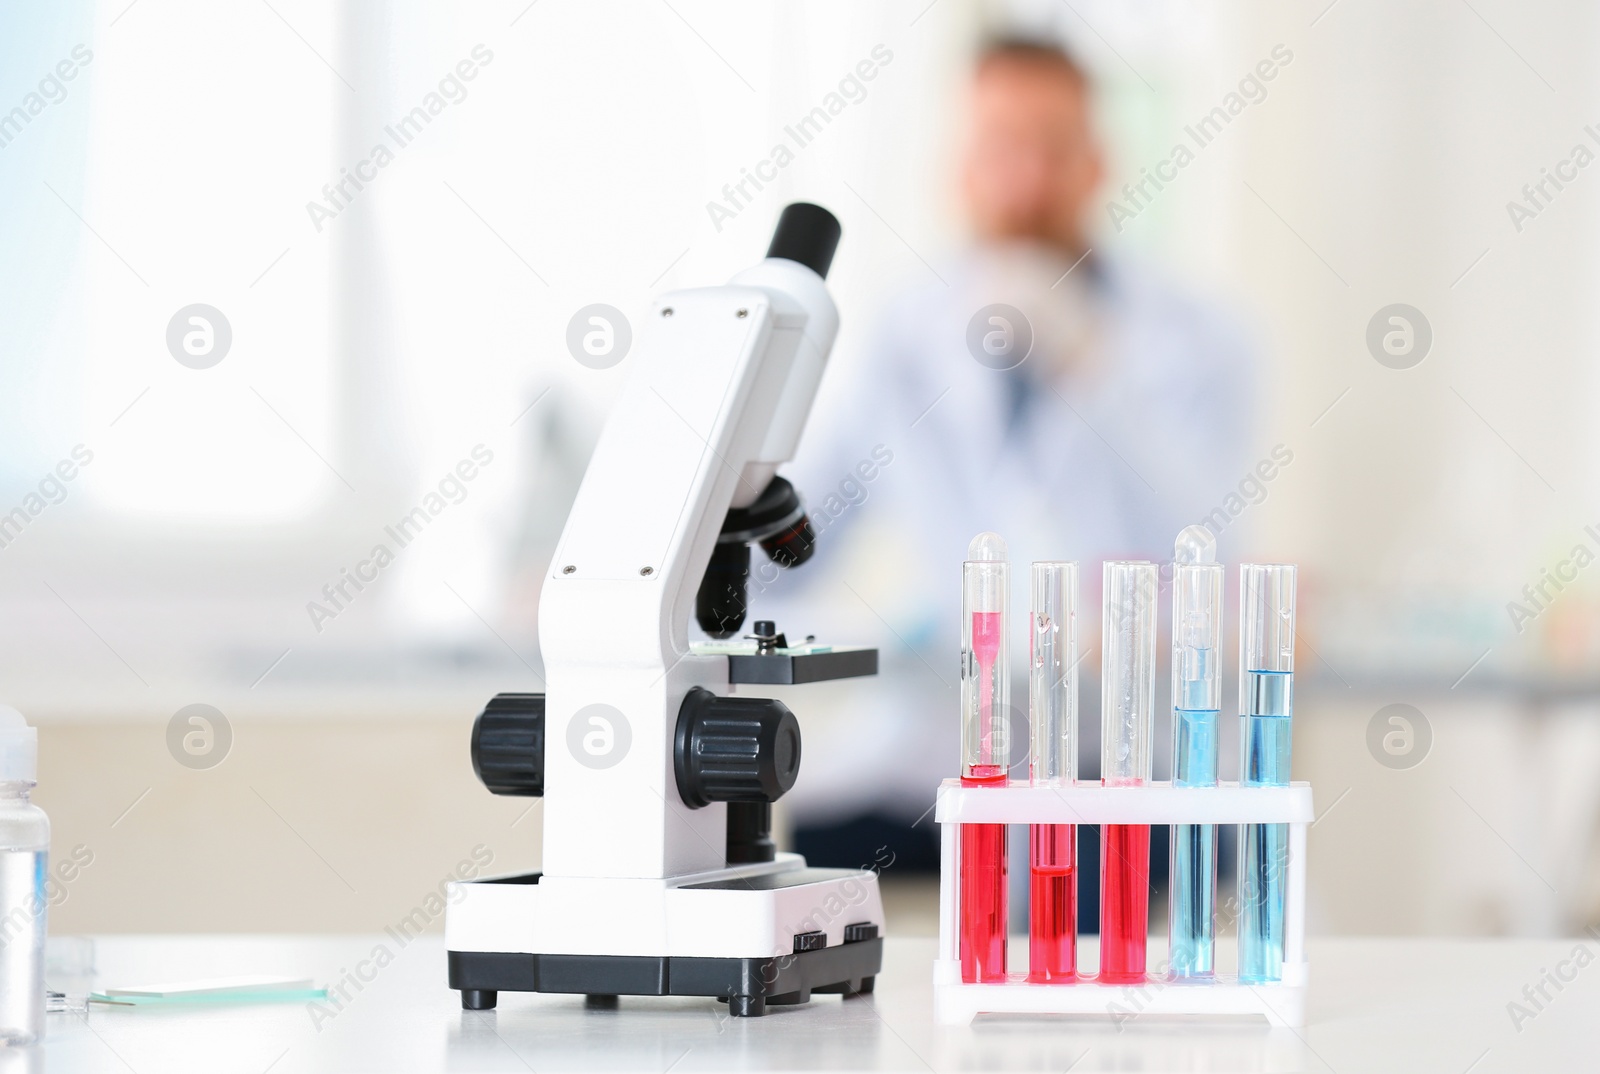 Photo of Rack with test tubes and microscope on table in laboratory. Research and analysis